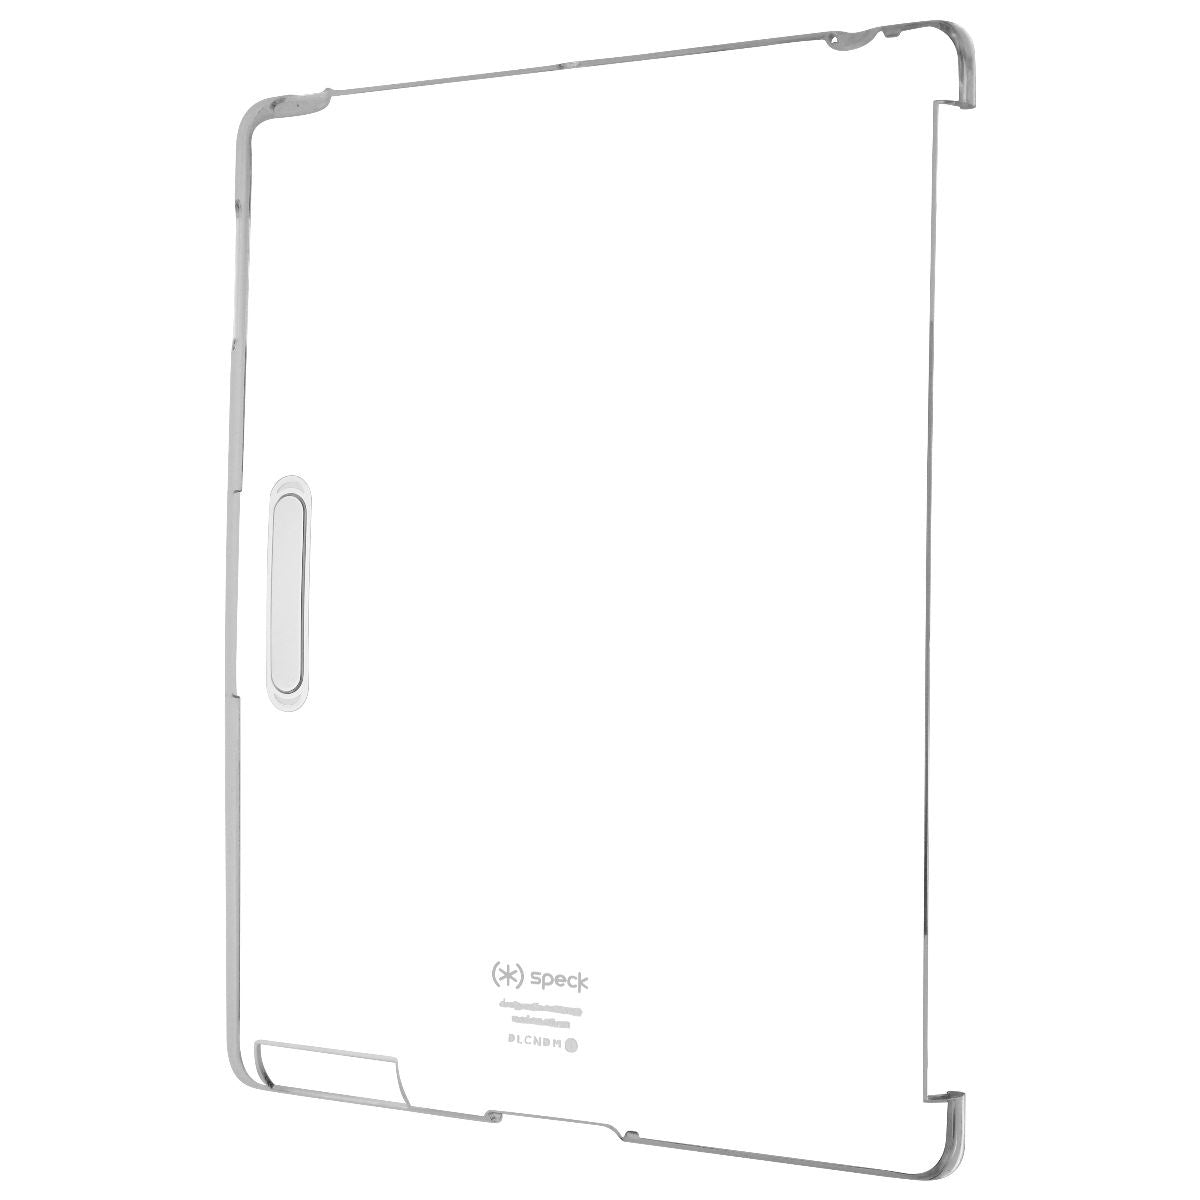 Speck SmartShell Ultra Thin Case for iPad 3 and iPad 4 - Clear (SPKA1203) iPad/Tablet Accessories - Cases, Covers, Keyboard Folios Speck    - Simple Cell Bulk Wholesale Pricing - USA Seller